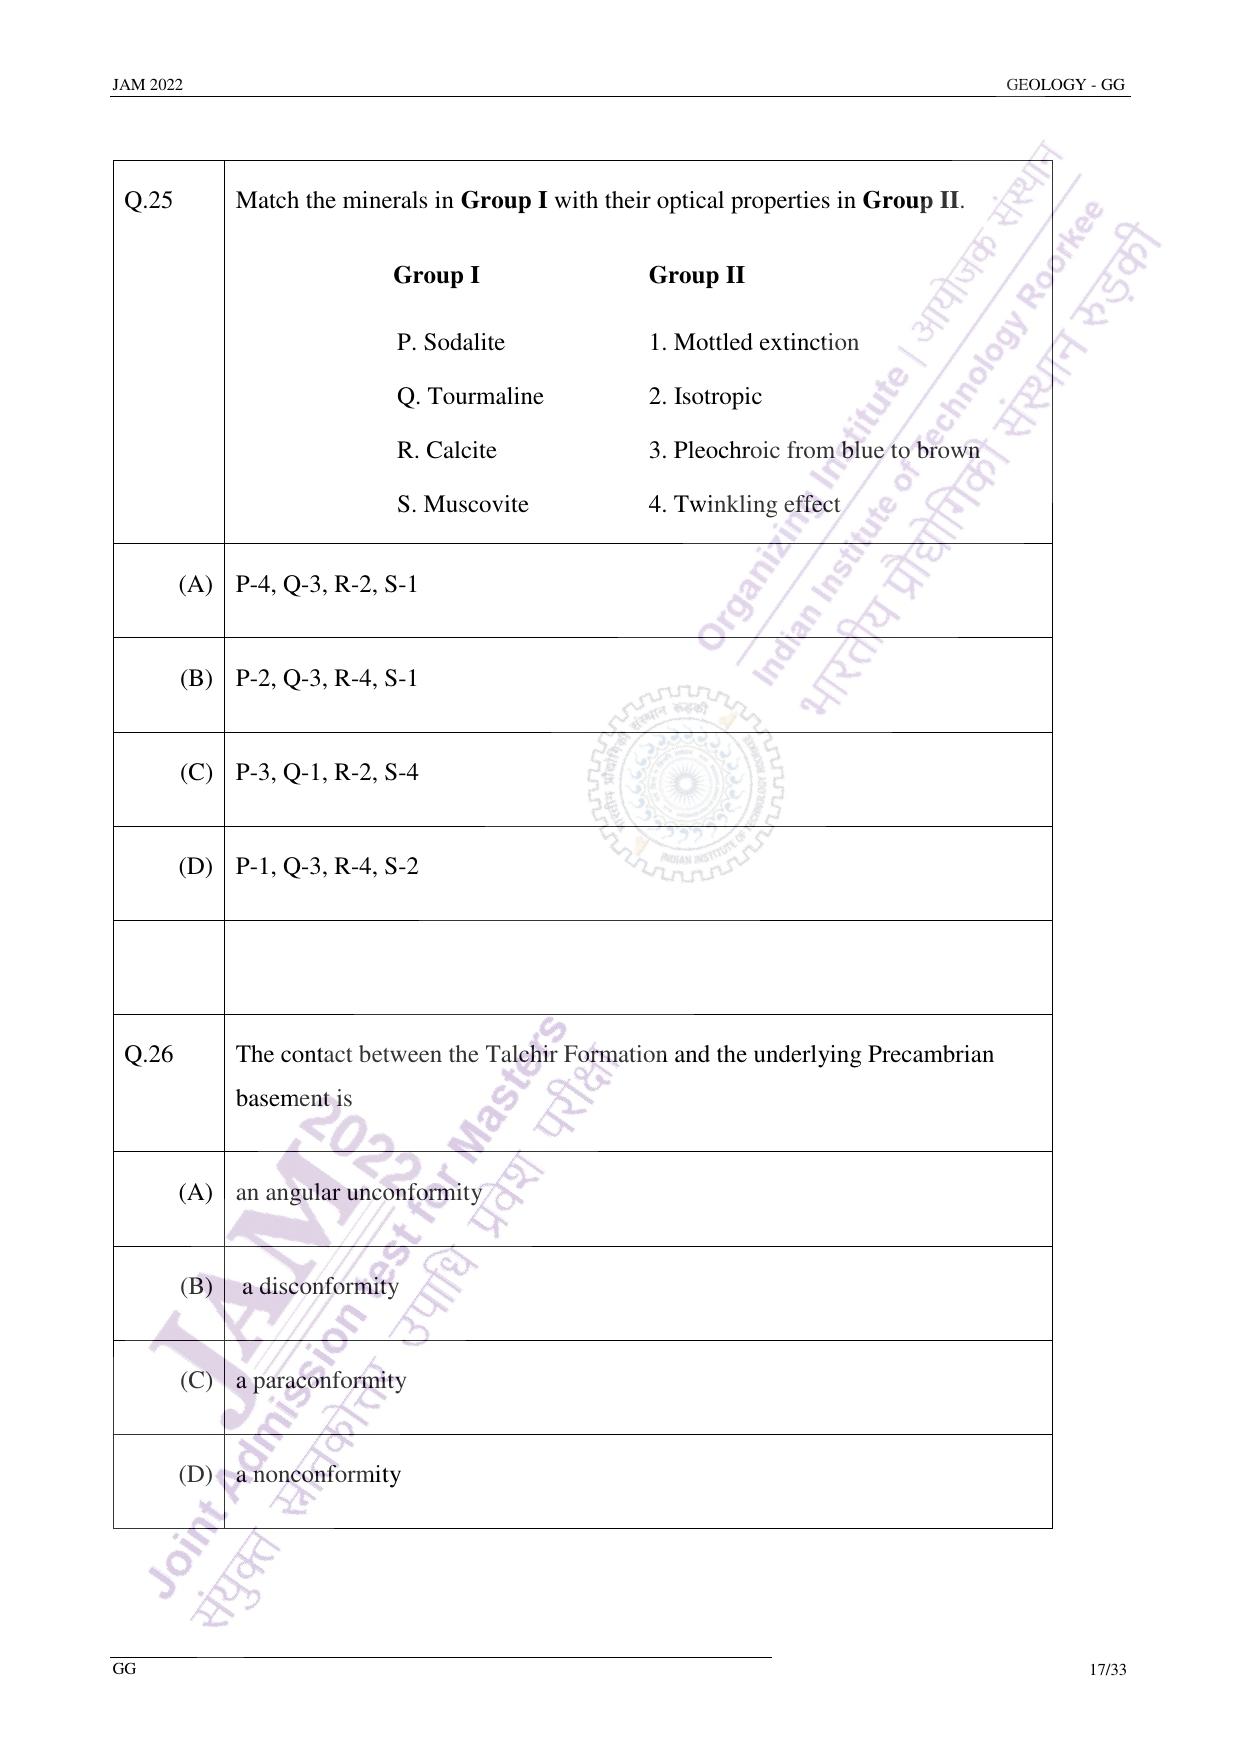 JAM 2022: GG Question Paper - Page 16